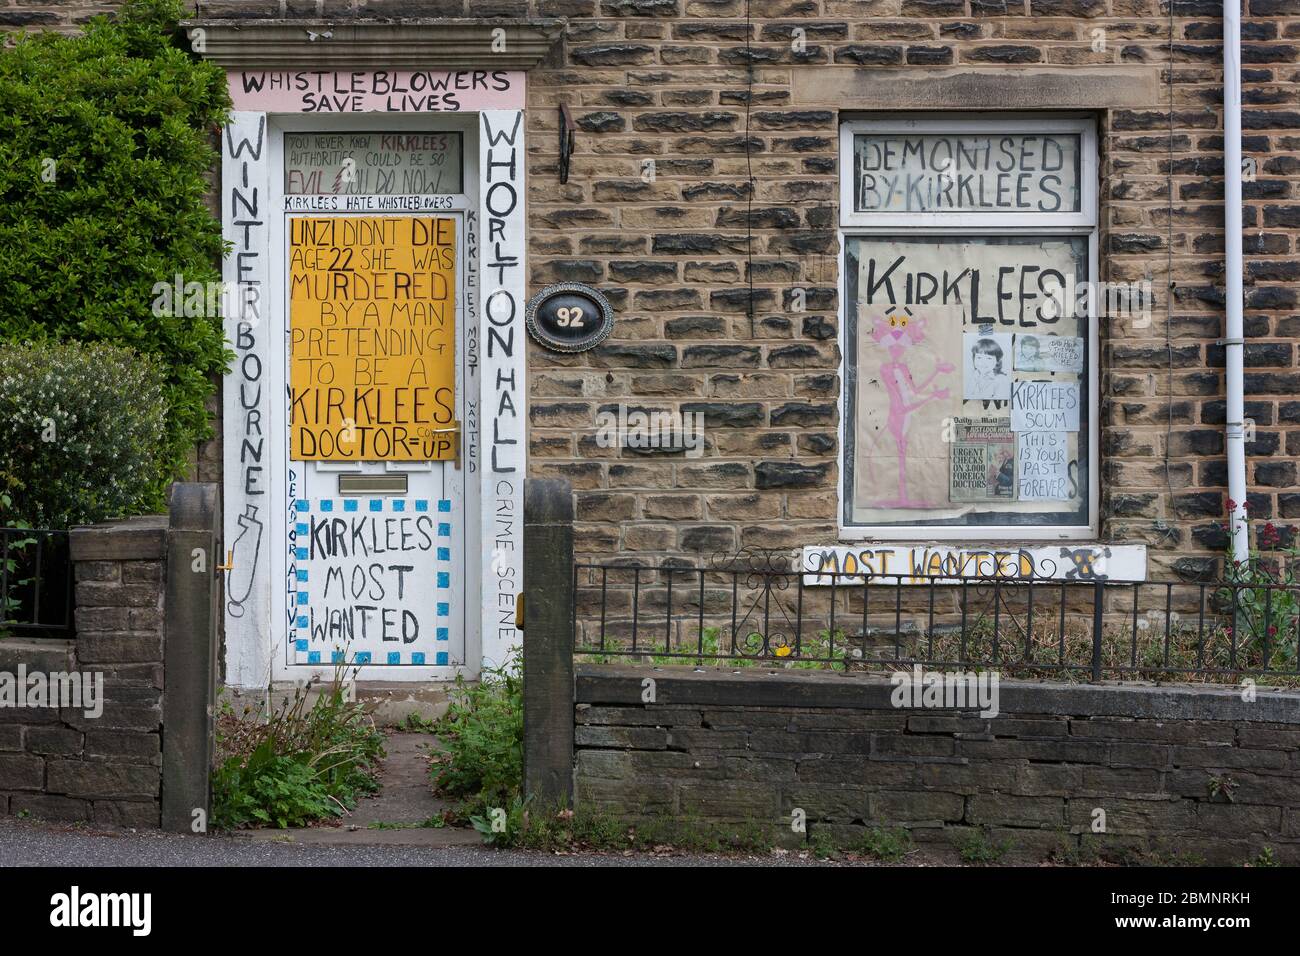 Meltham, UK - May 5 2020: A house in Meltham covered with writing and signs protesting against Kirklees Council, including references to NHS funded ho Stock Photo